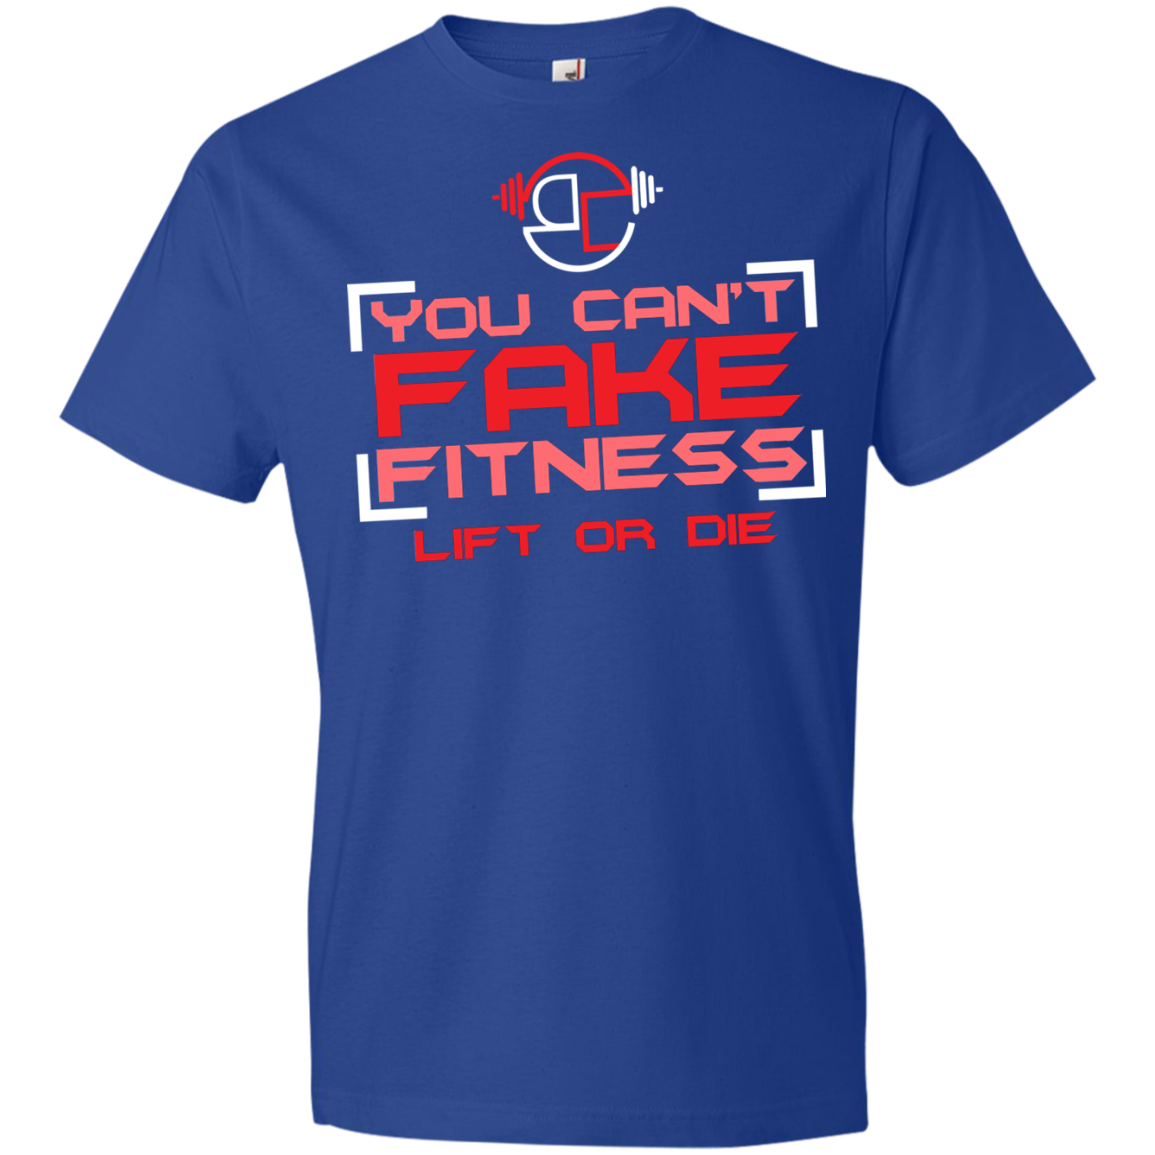 Can't fake fitness T-Shirt 4.5 oz